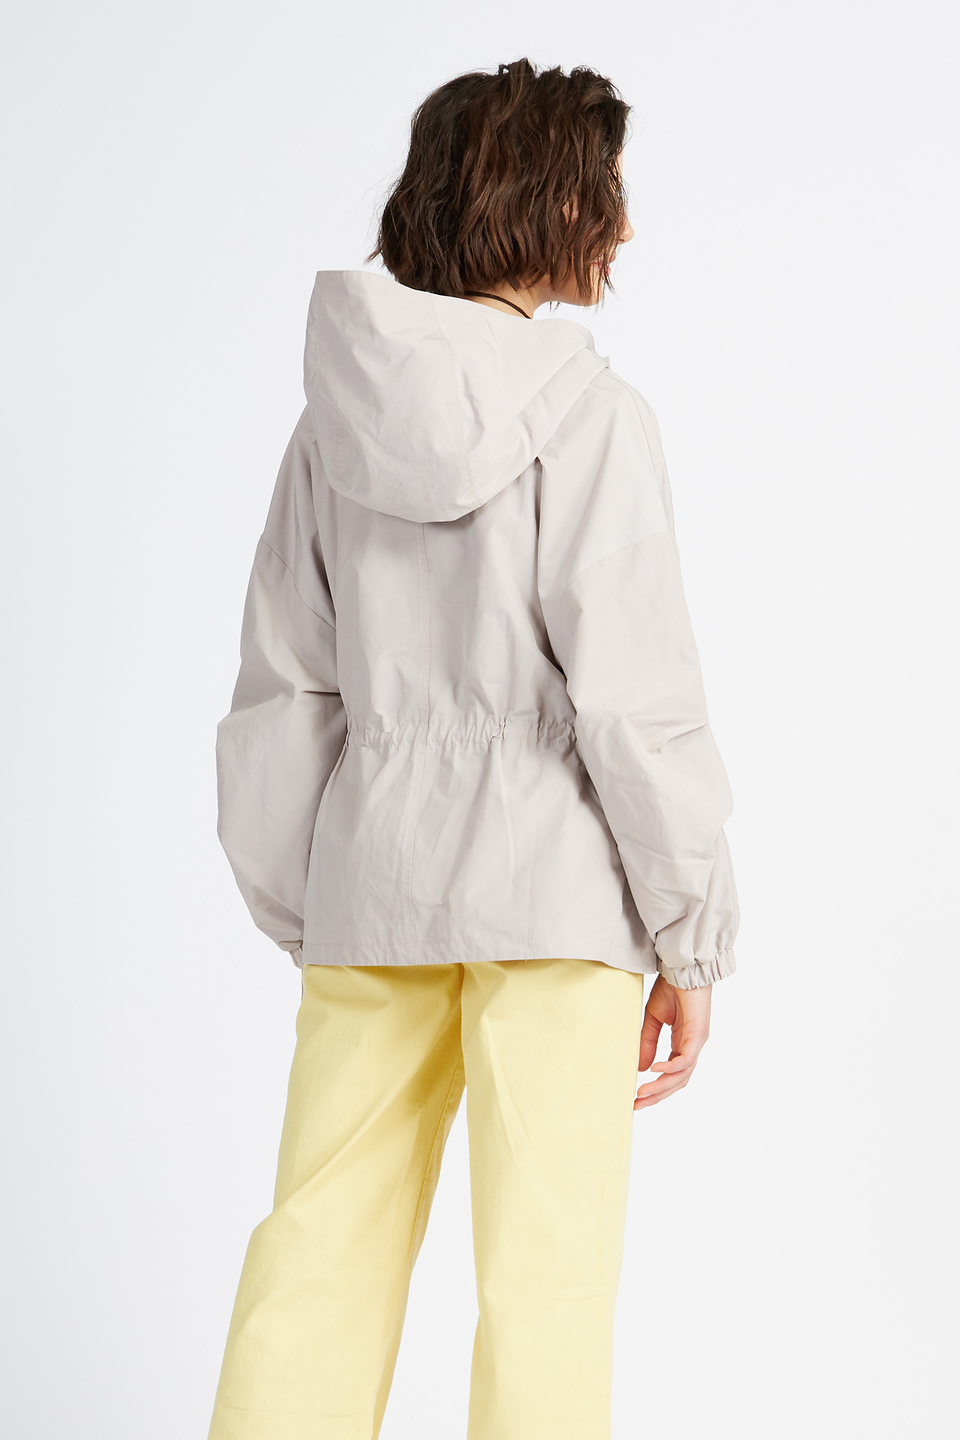 Solid color women's capsule Spring Weekend trench jacket with pockets - Vandani | La Martina - Official Online Shop